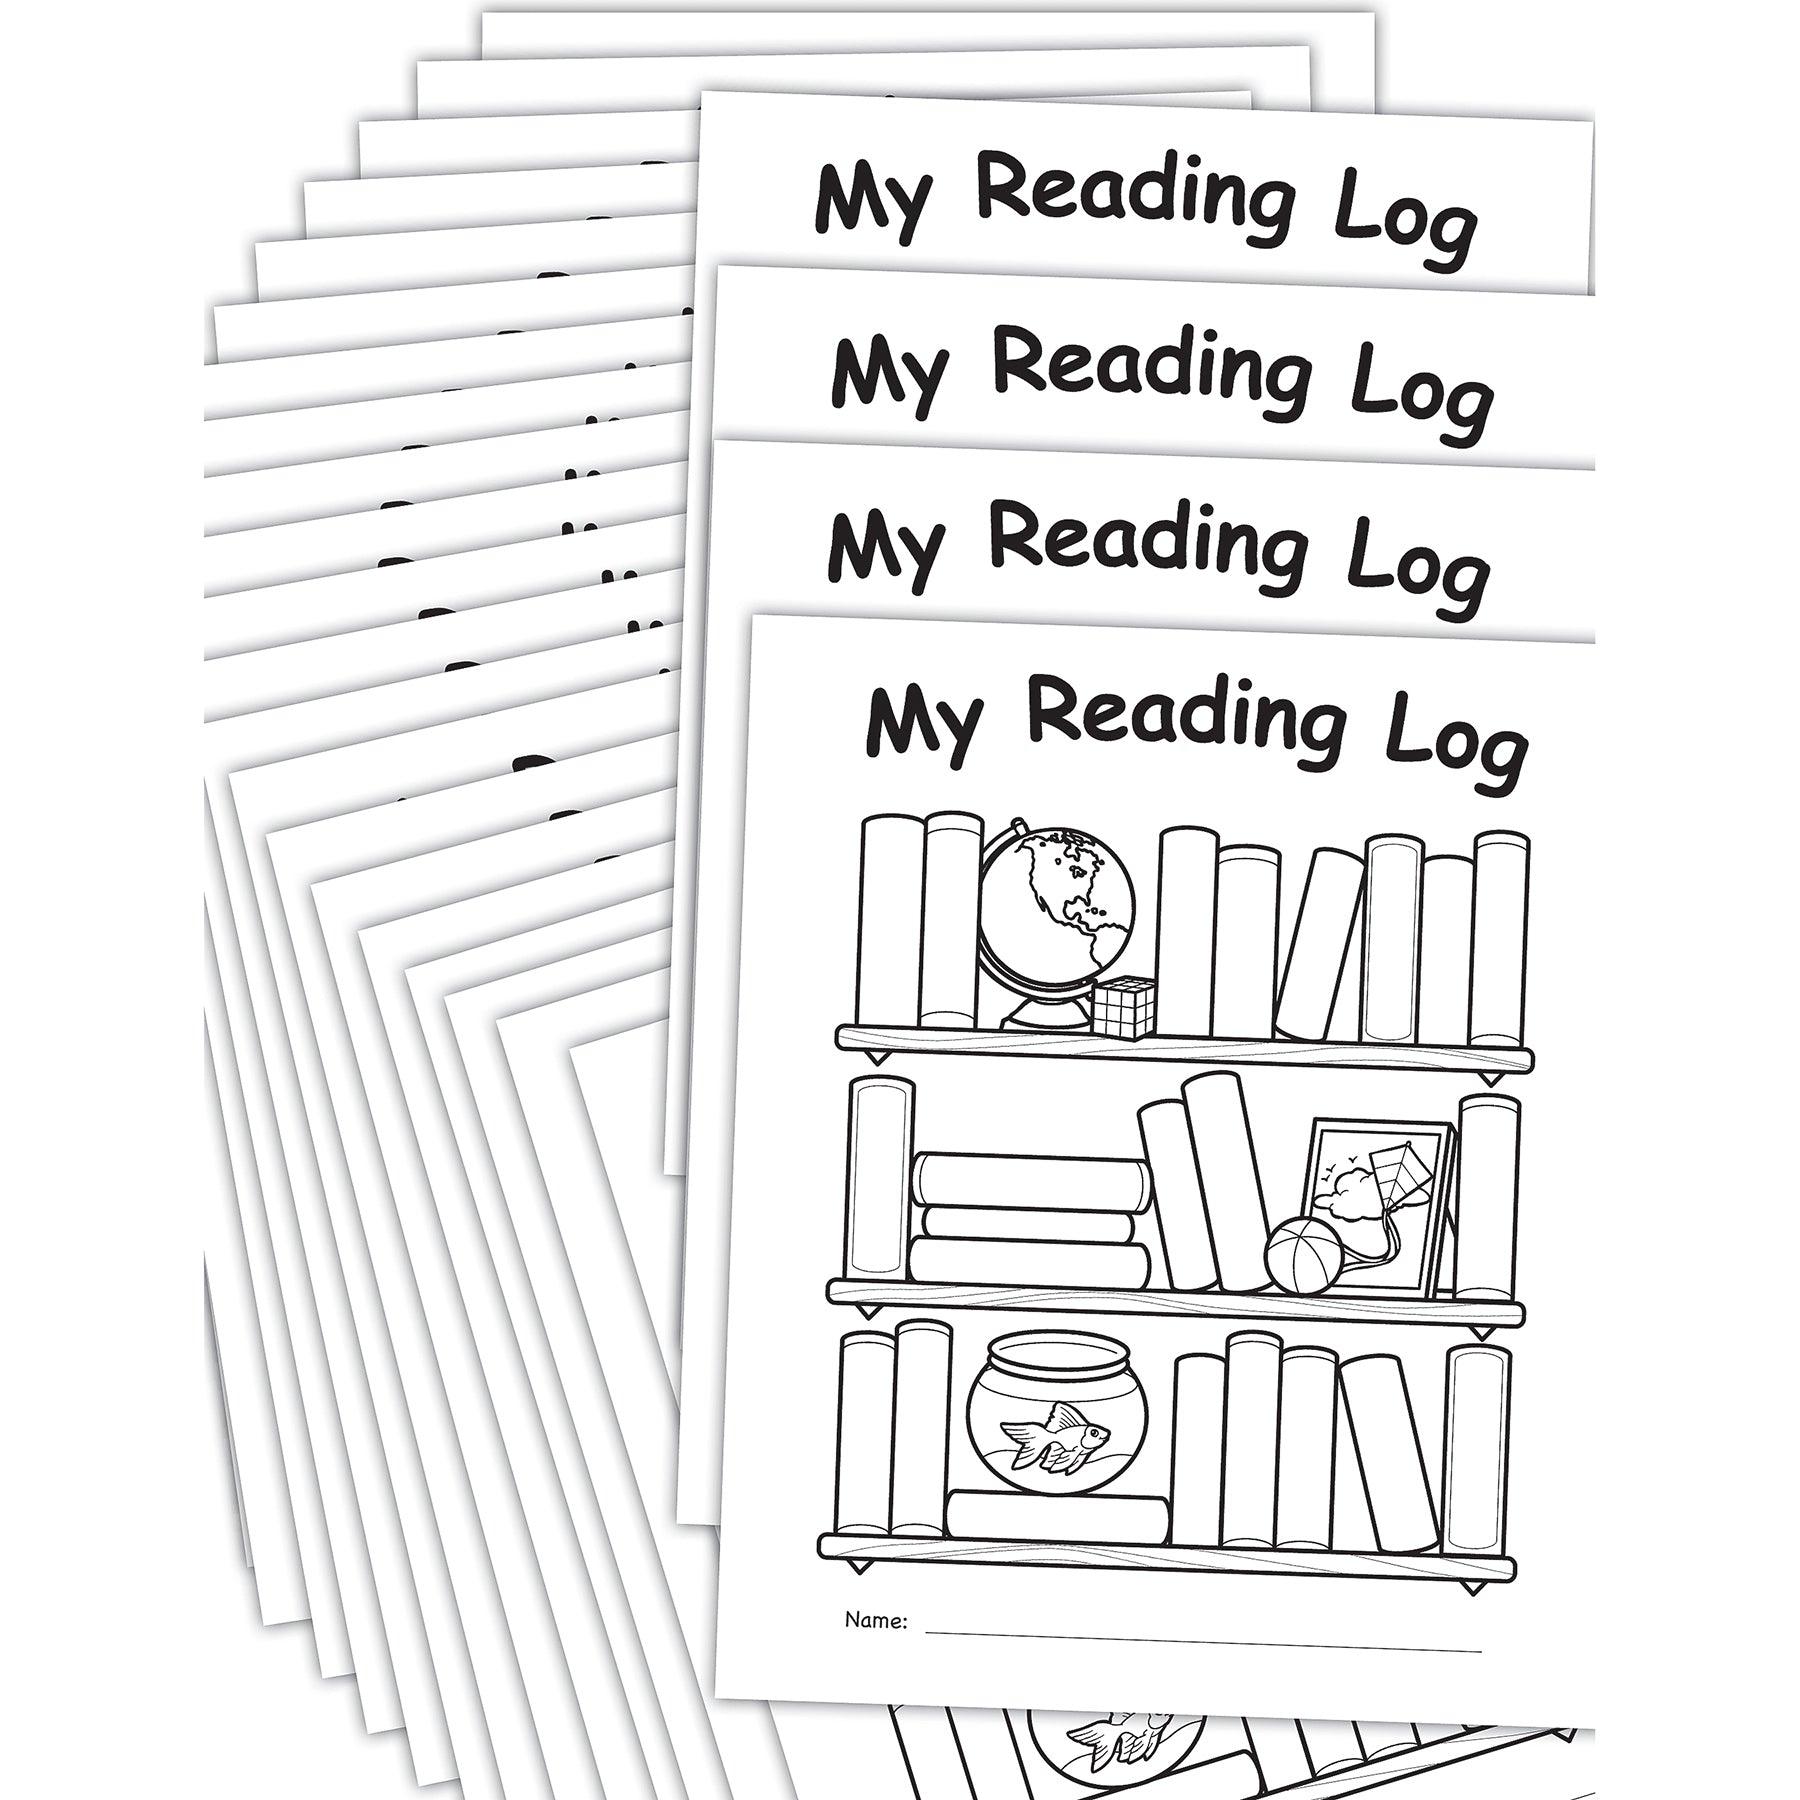 My Own Books: My Reading Log, Pack of 25 - Loomini